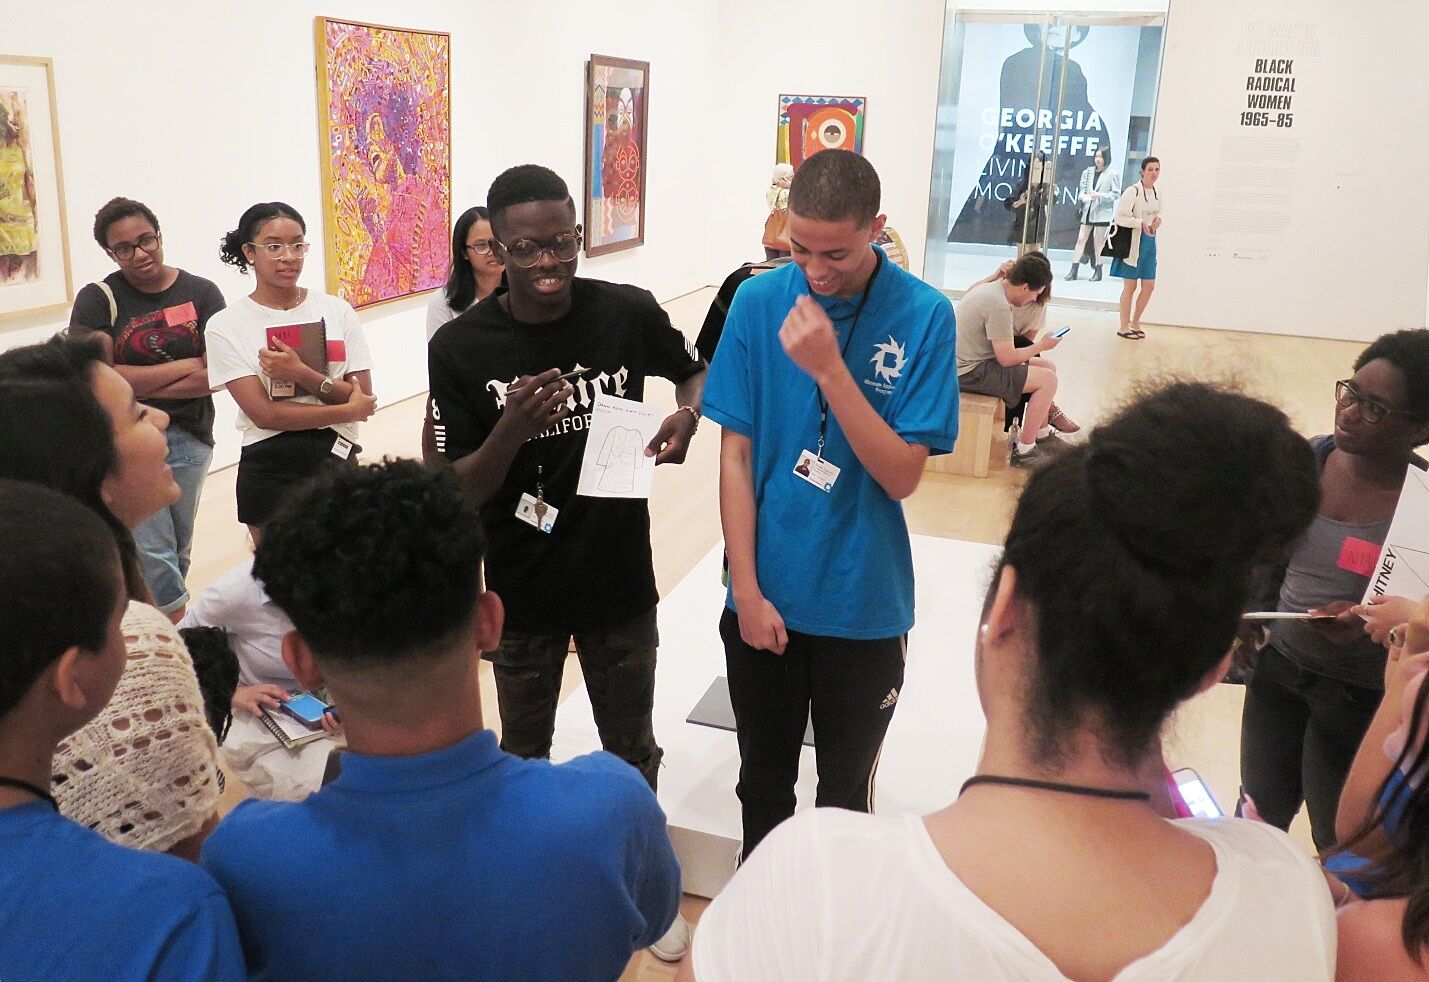 Teens at the Brooklyn Museum.